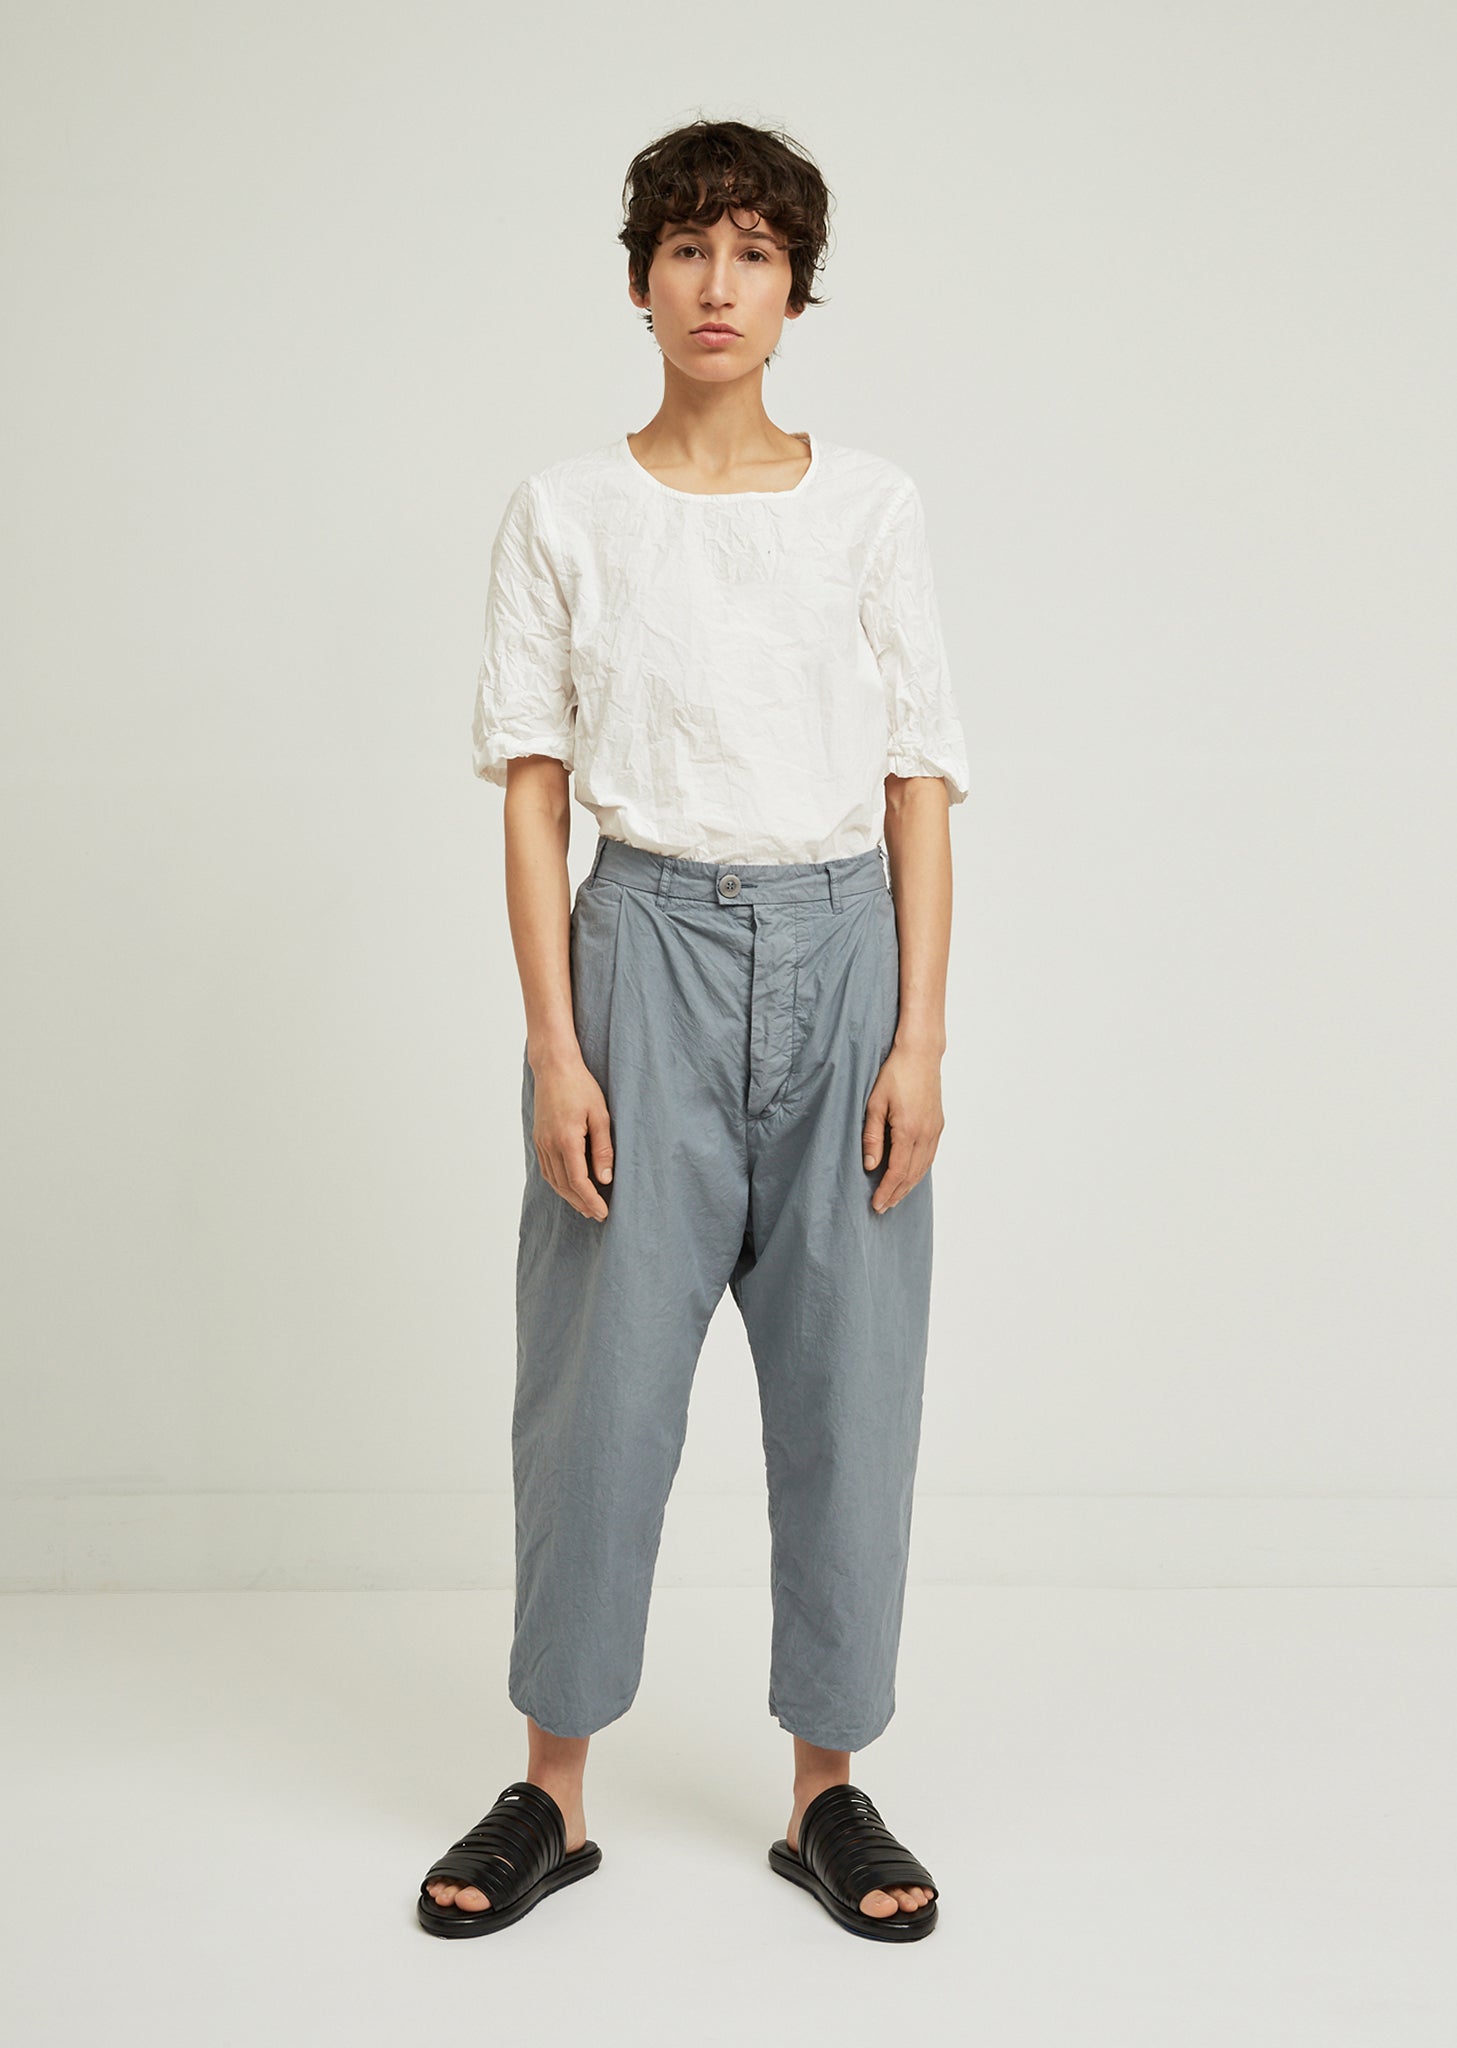 Women's Summer Trousers | Ladies Lightweight Trousers | ASOS